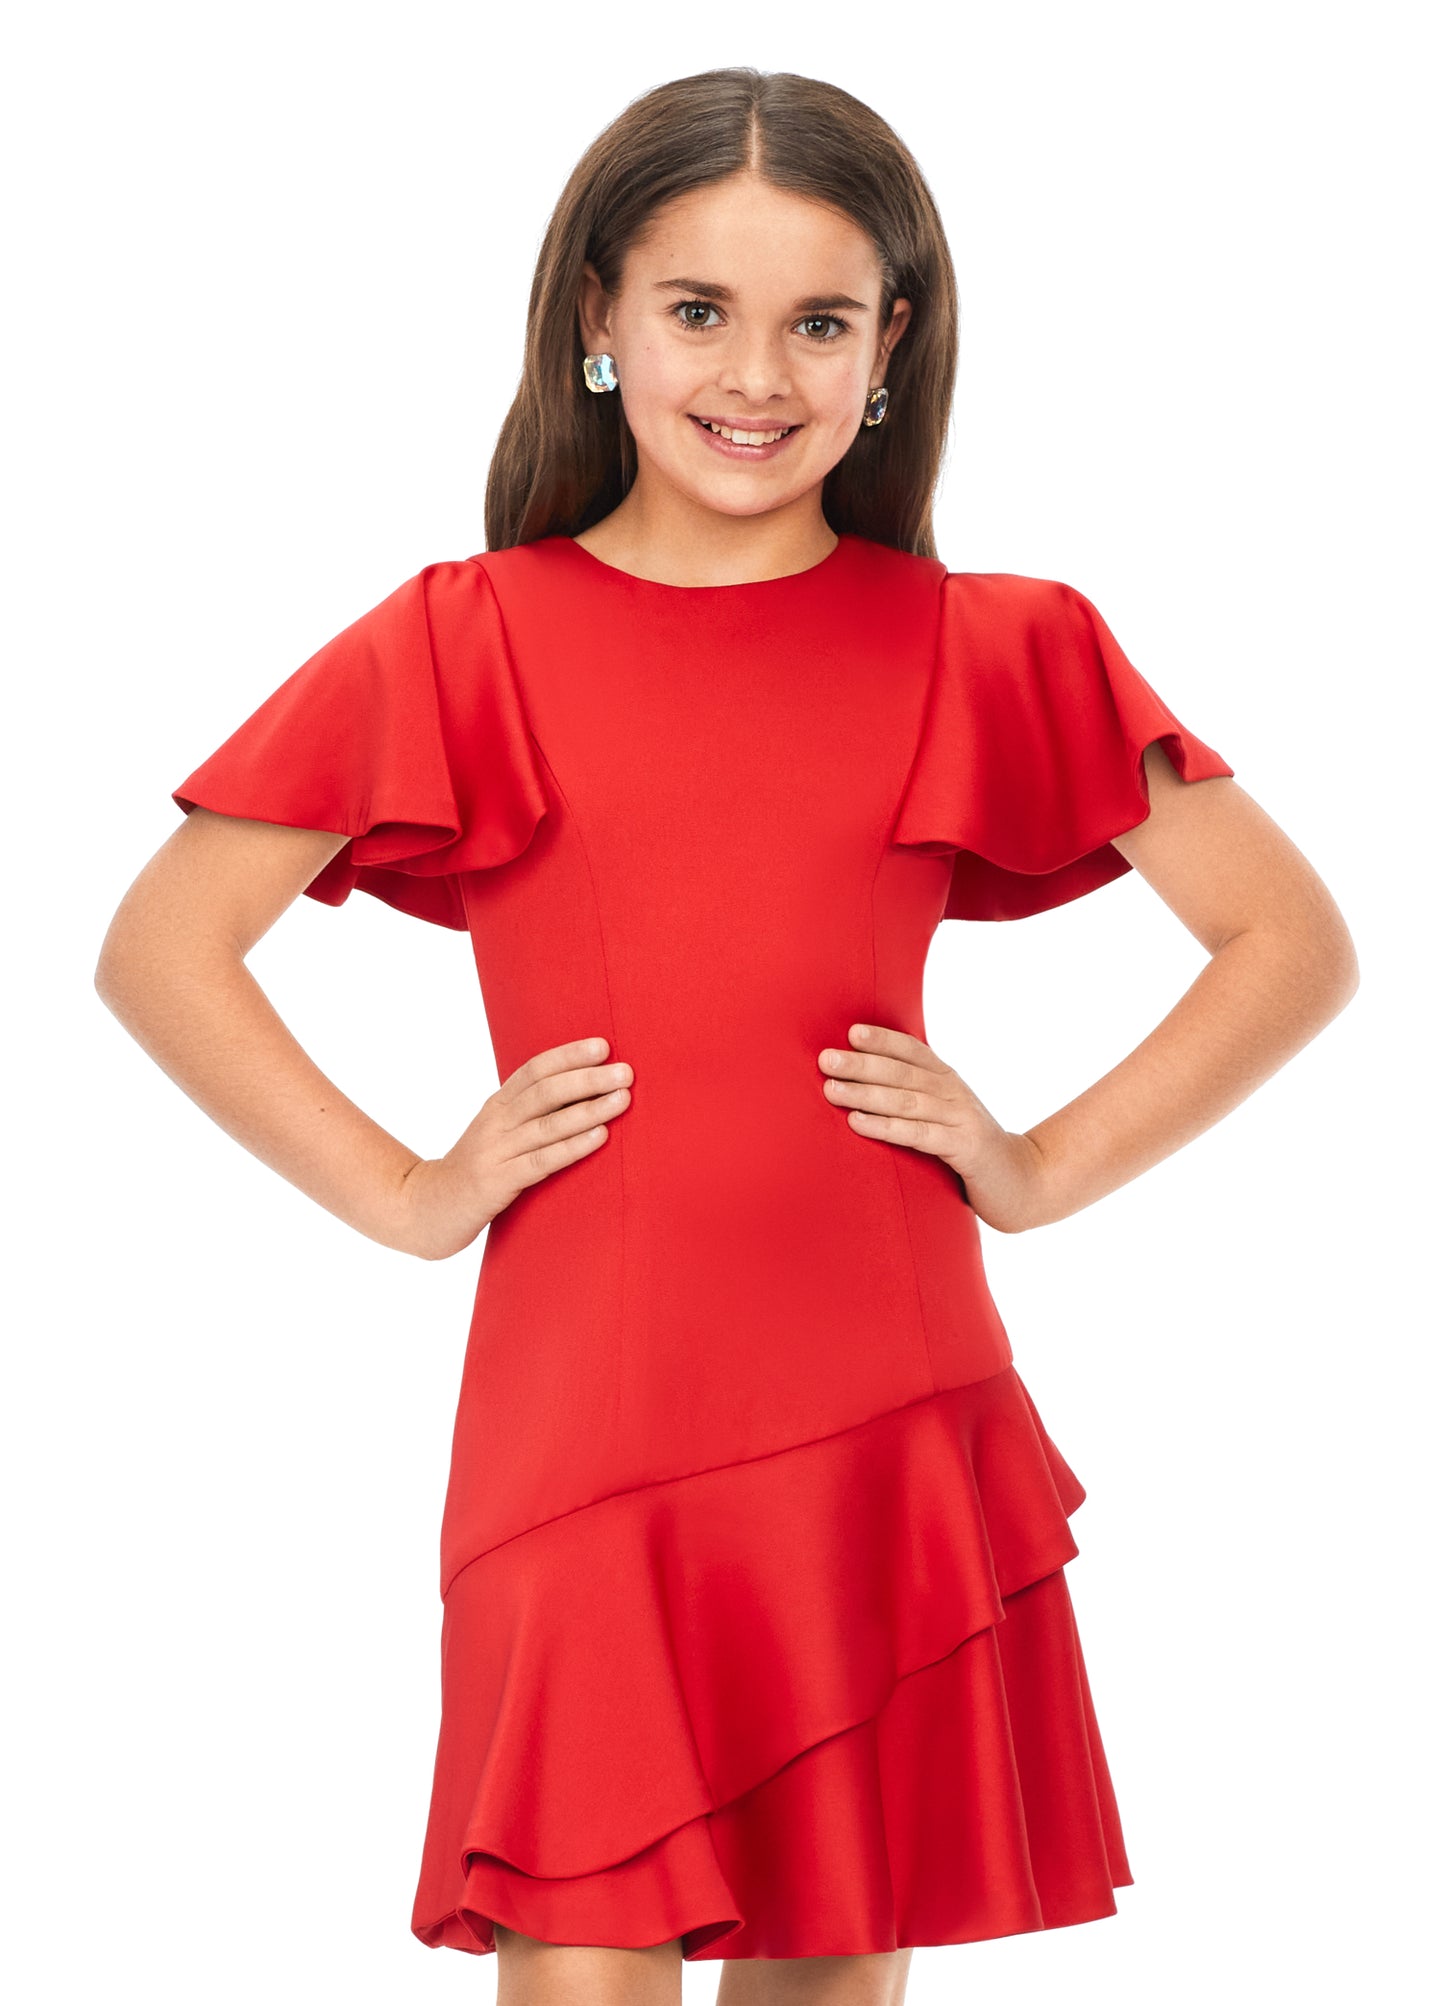 Ashley Lauren Kids 8167 Girls Crepe Cocktail Dress with Ruffle Details  A crepe dress perfect for any event. This dress features flutter sleeves and an asymmetric ruffle skirt red